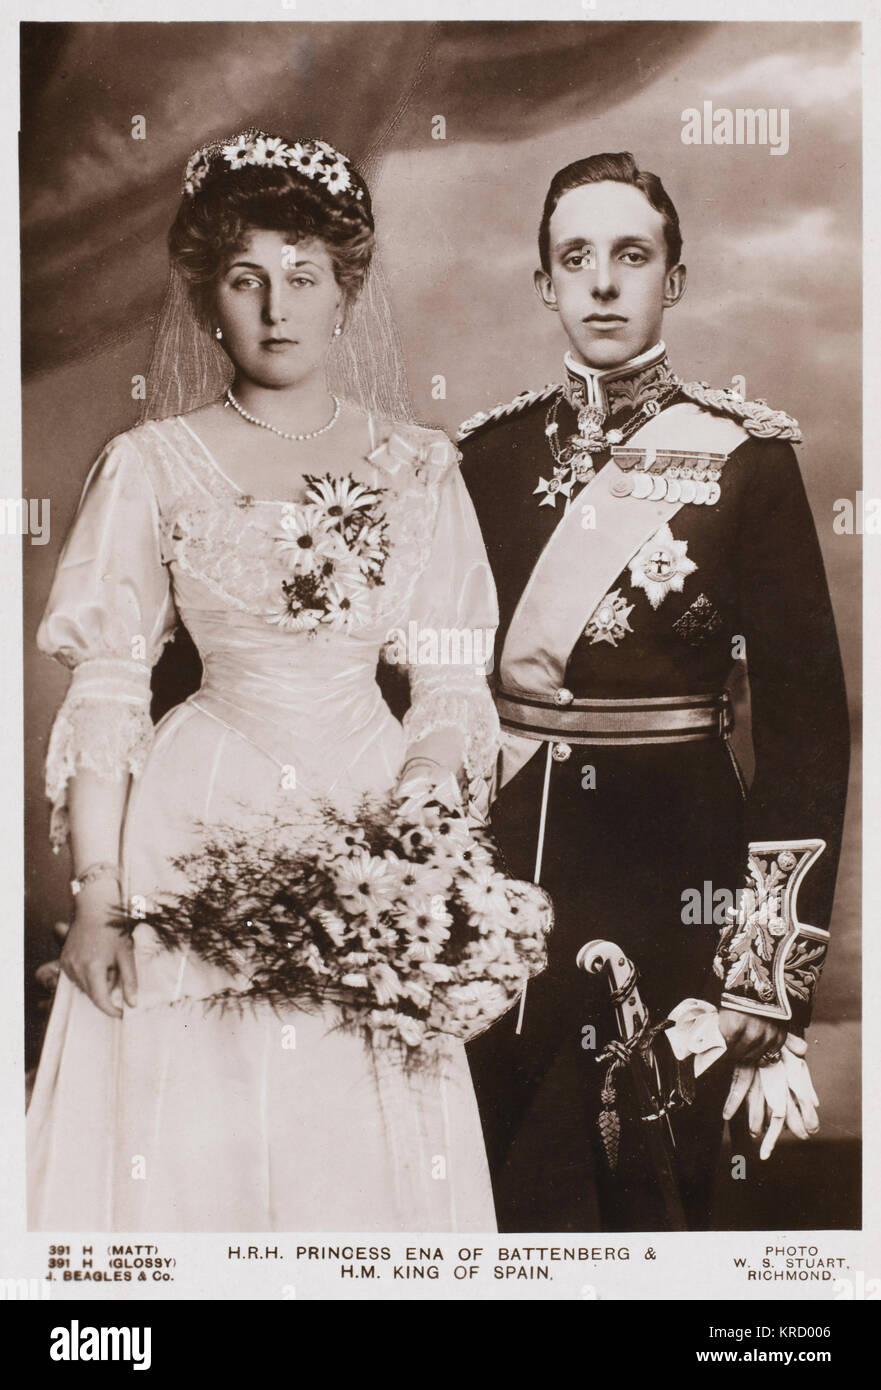 ALFONSO XIII, KING OF SPAIN Princess Ena of Battenberg,  daughter of Princess Beatrice  and grandaughter of Queen  Victoria at her marriage to  King Alfonso XIII of Spain.     Date: 1886 - 1941 Stock Photo